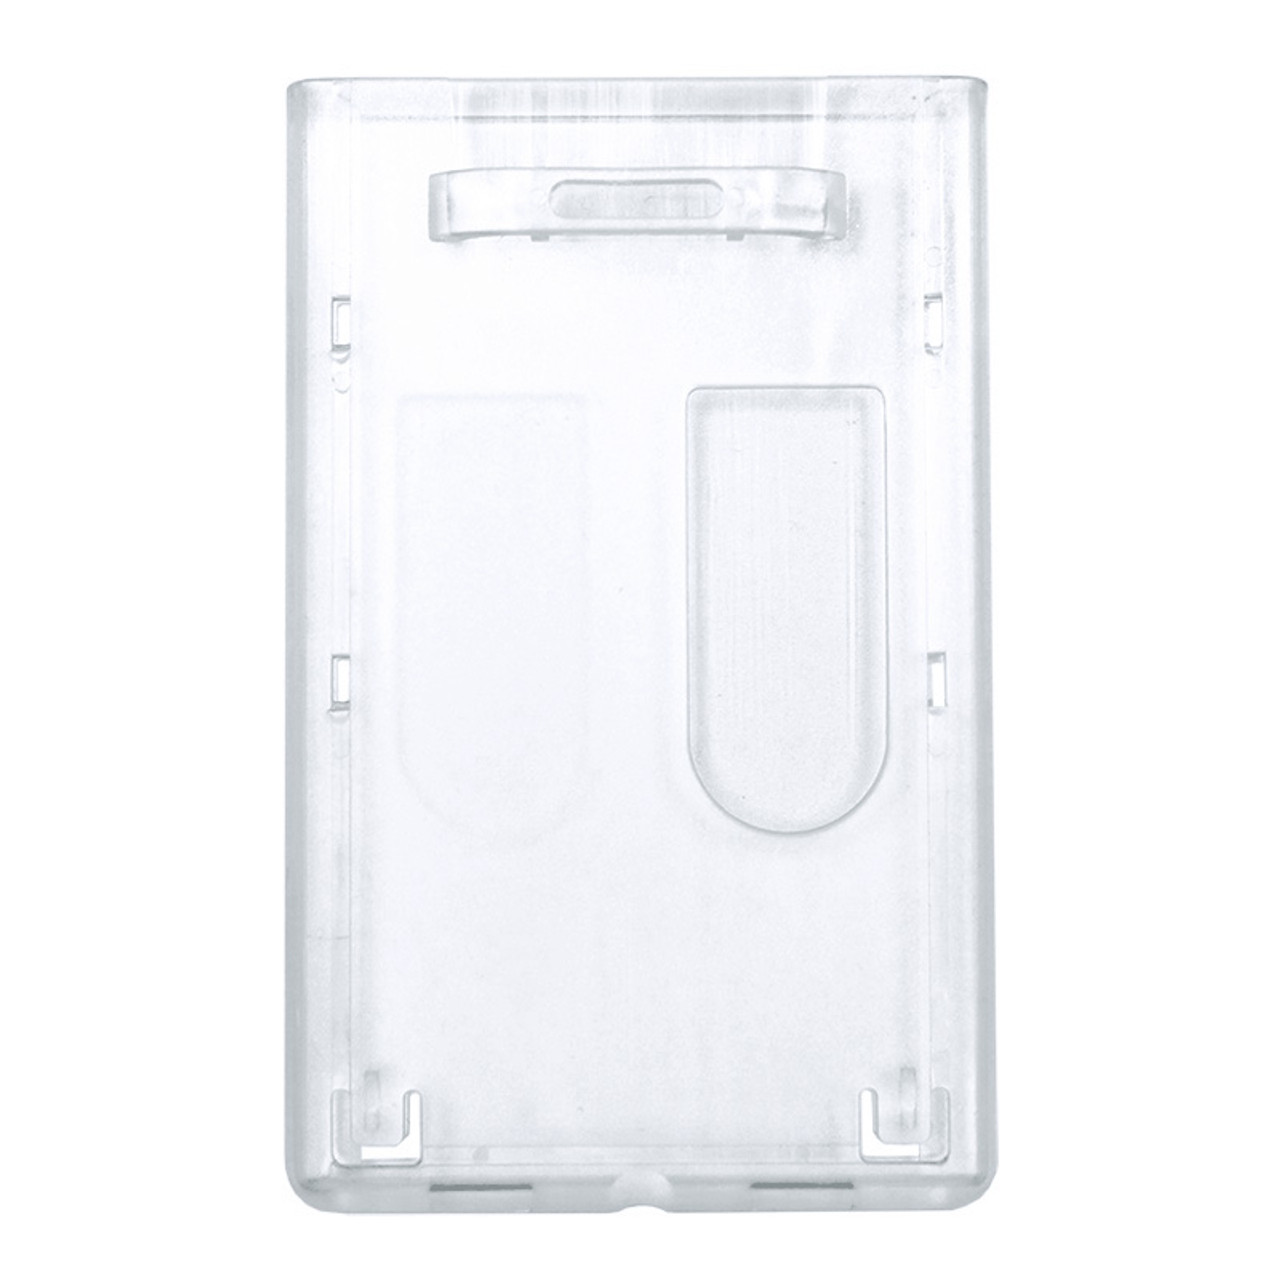 Heavy Duty Vertical Identification Card Holders: 2 3/8(W)x 3 1/4(H)  Credit Card Size 